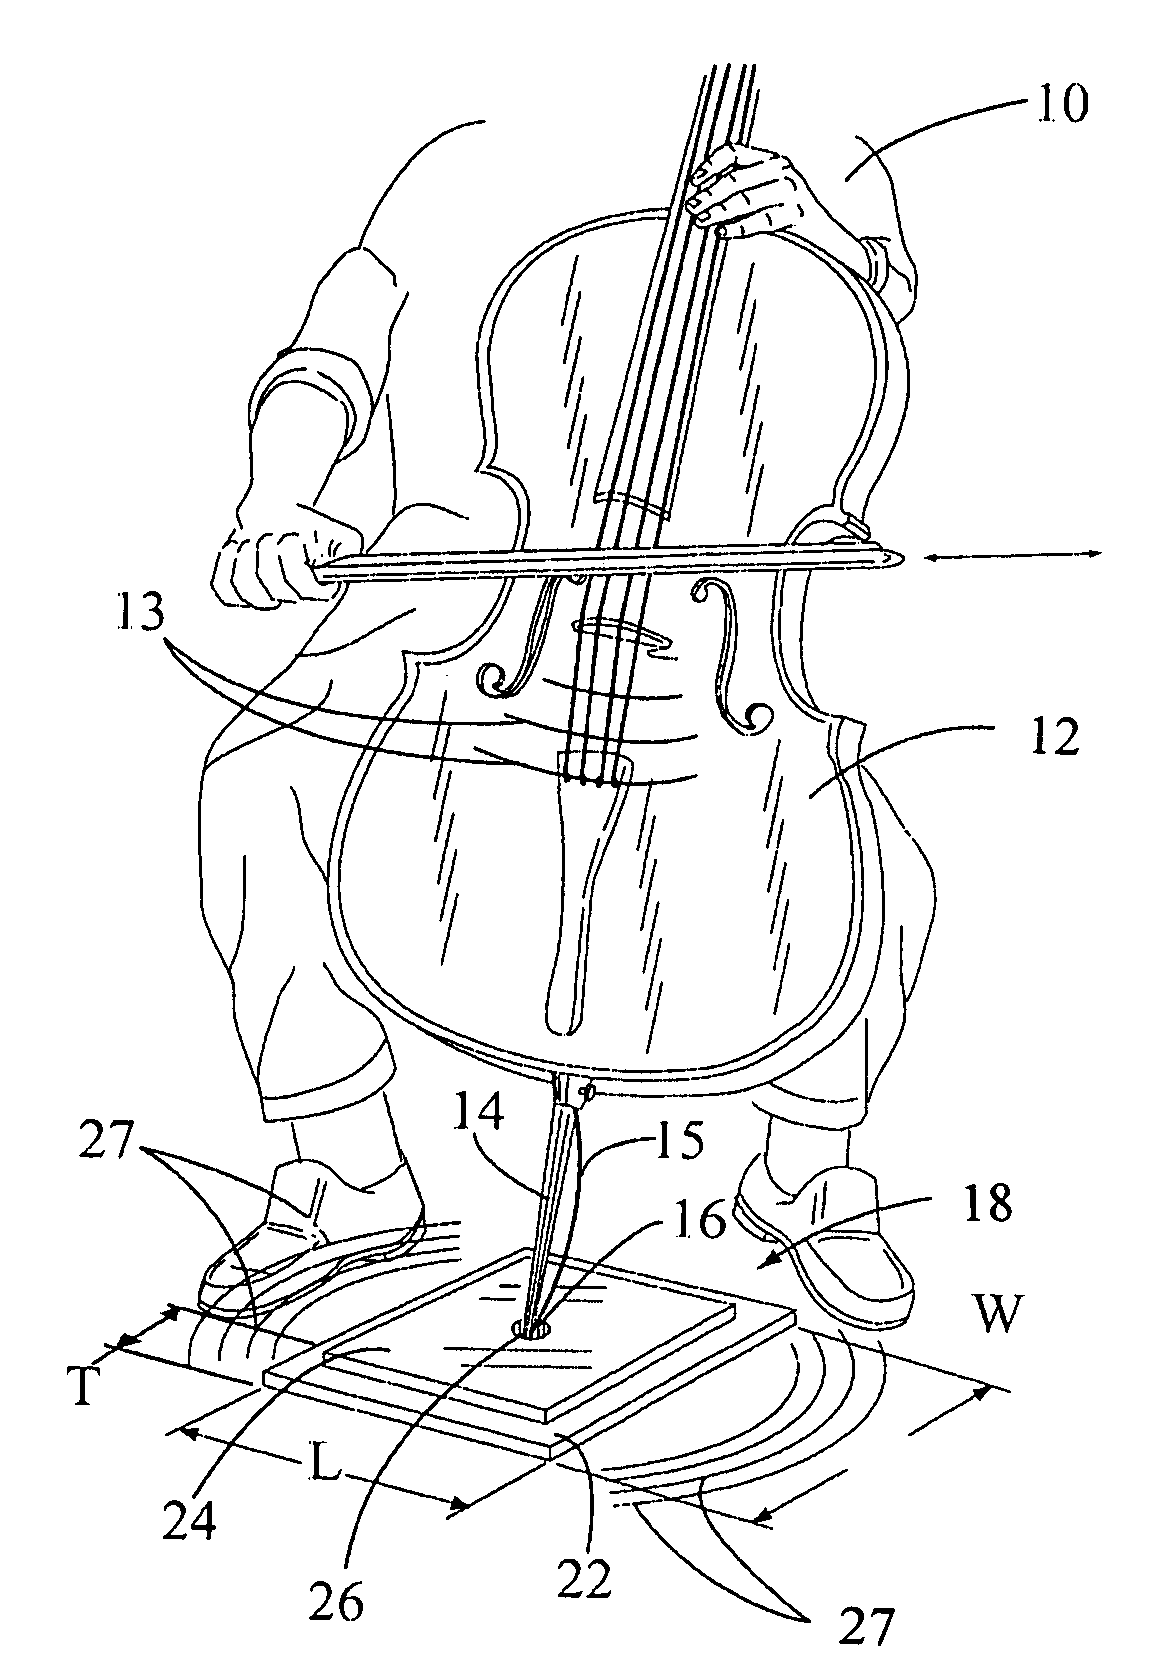 Portable dissipating medium used for removal of vibrational interference in a bowed string of a violin family instrument